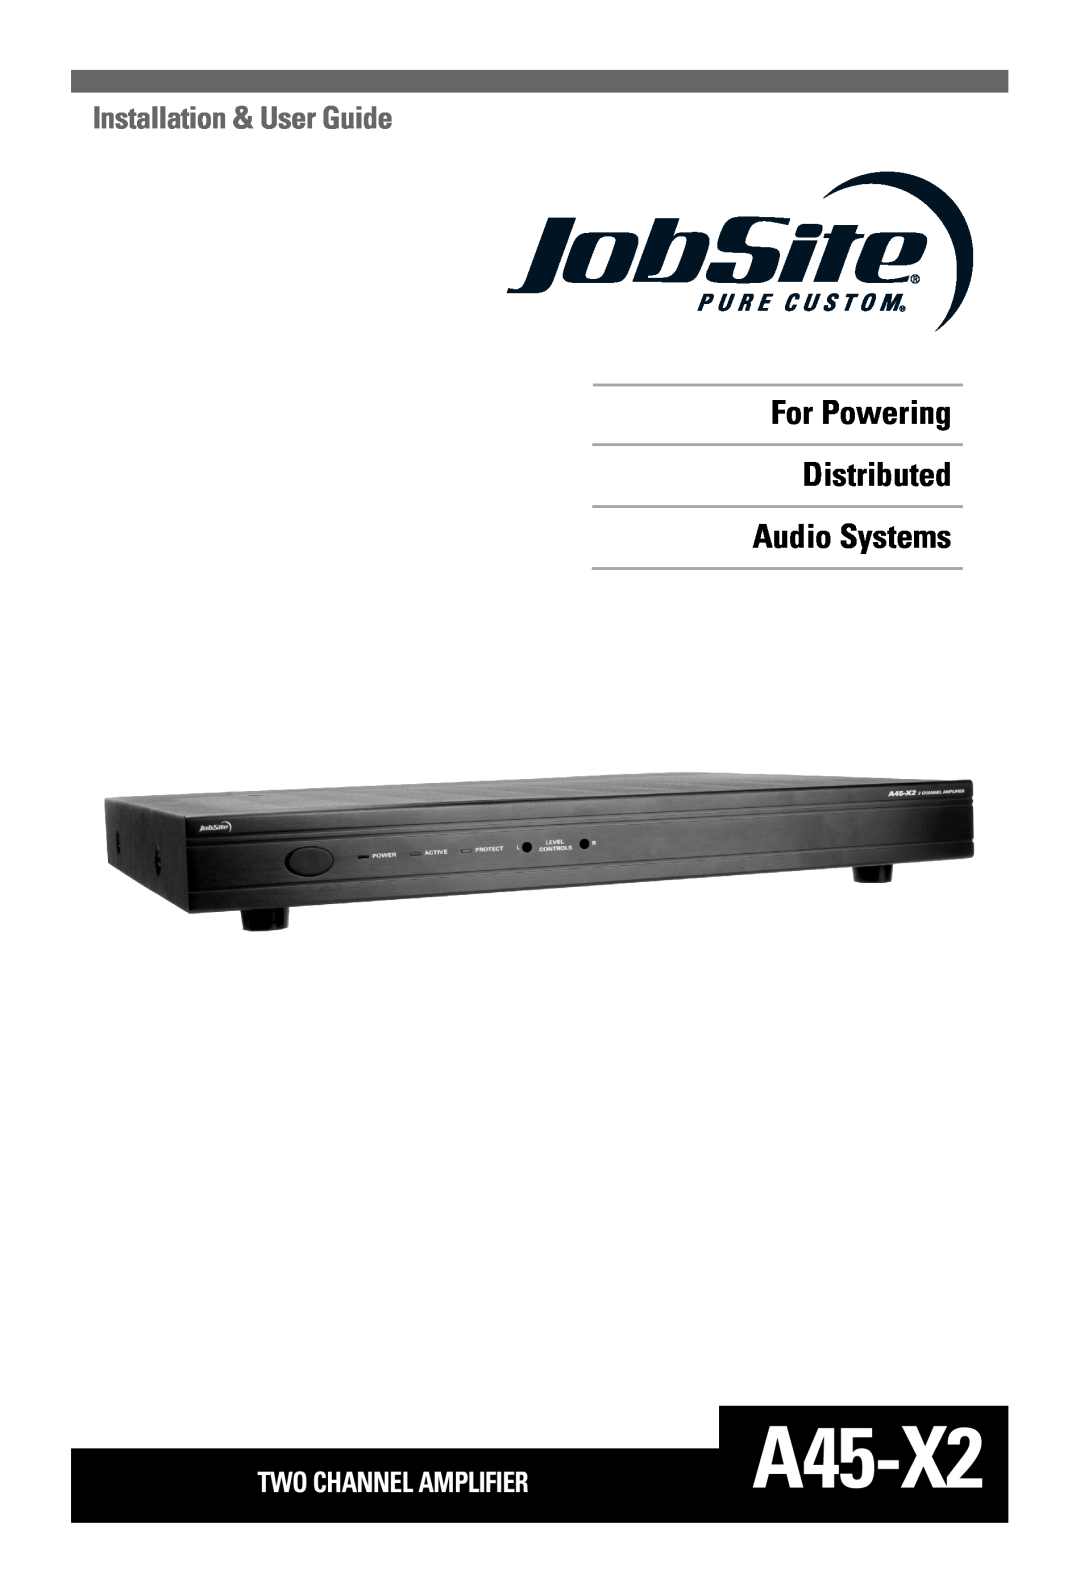 JobSite Systems A45-X2 manual For Powering Distributed Audio Systems, Installation & User Guide, Two Channel Amplifier 